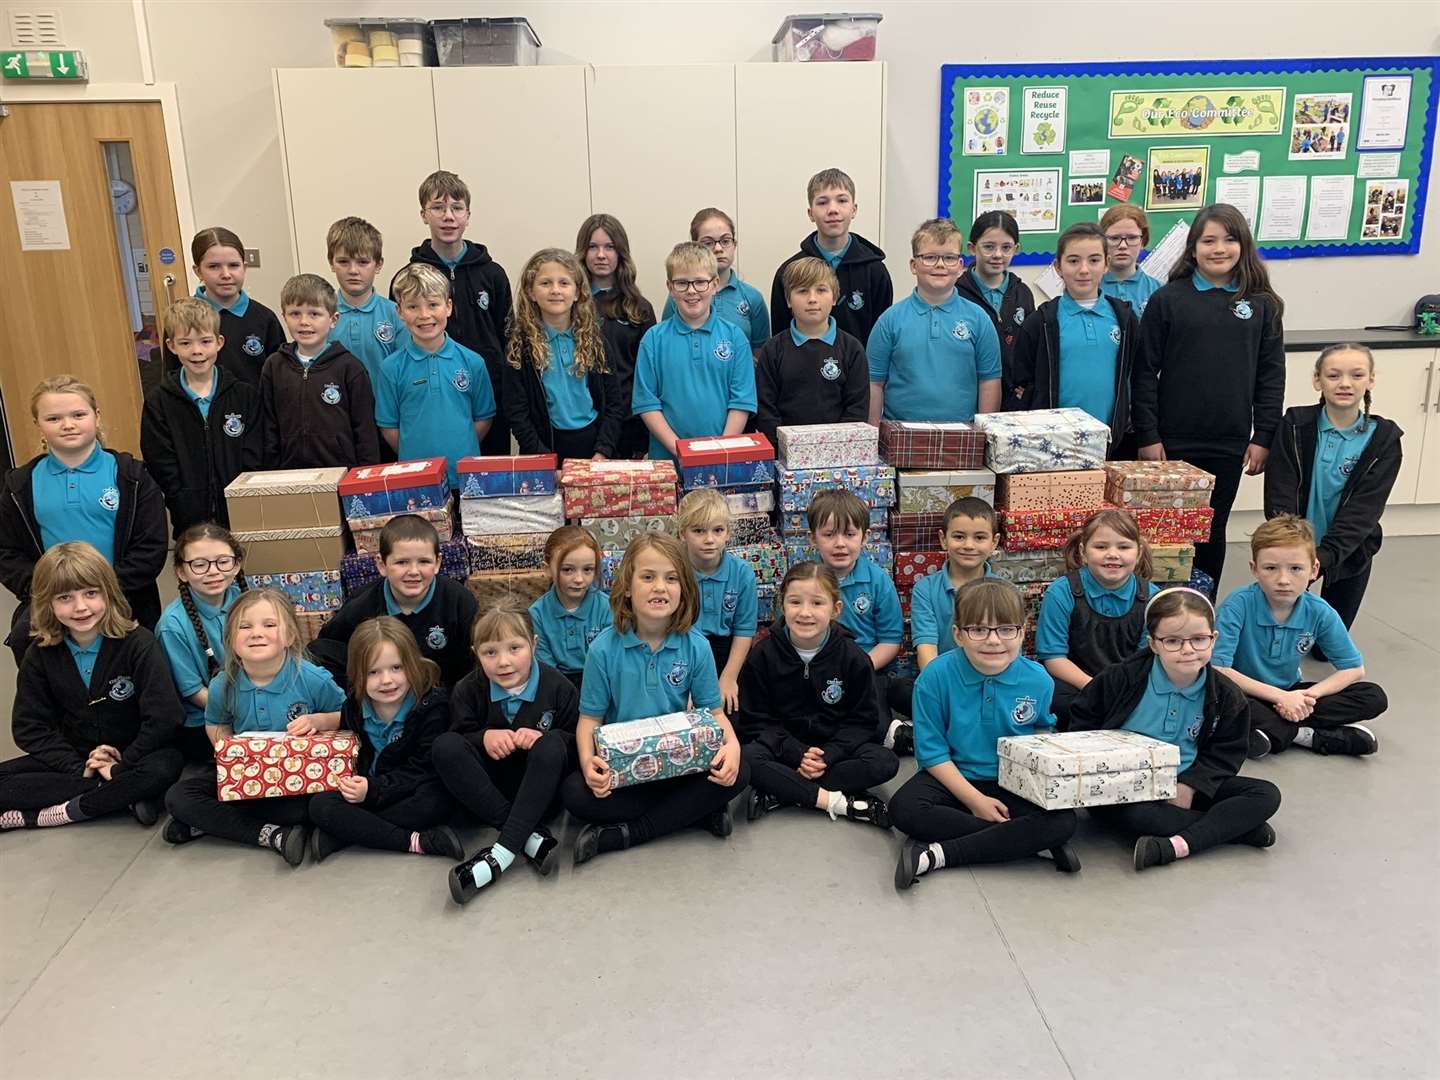 Pupils have spent the last couple of weeks filling 69 shoe boxes with practical items, as well as a few treats, and wrapping them in Christmas paper.